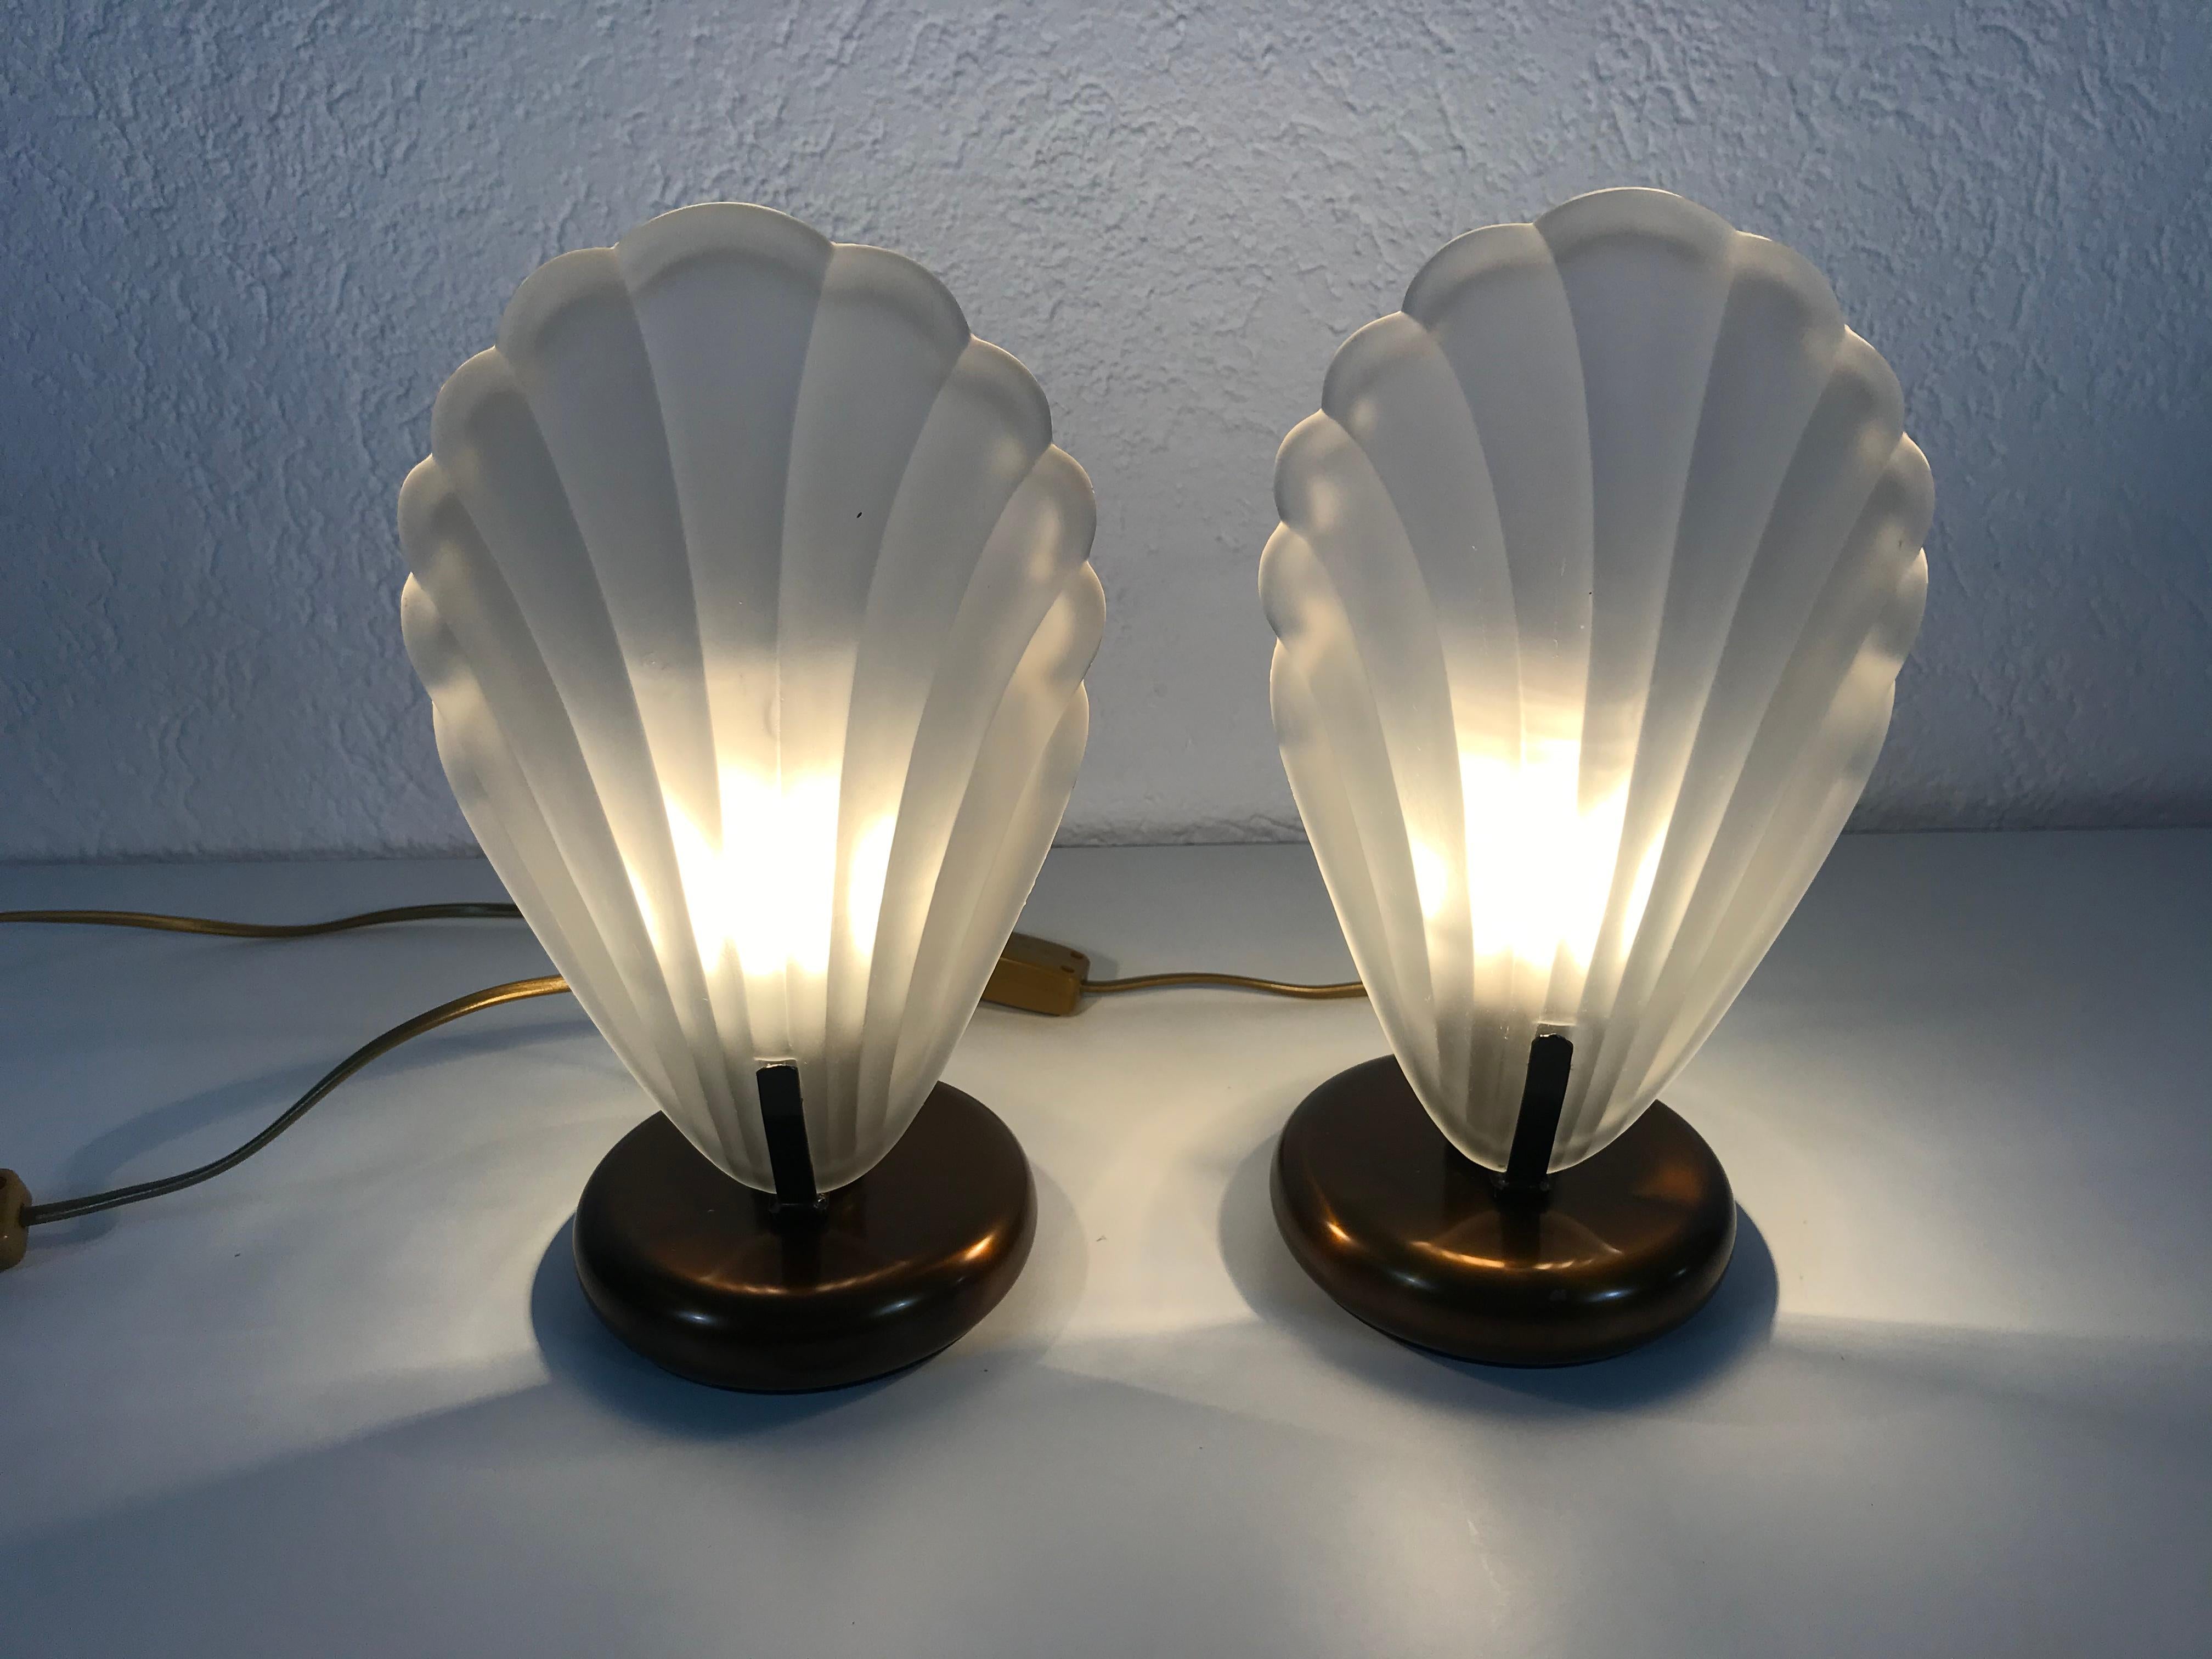 A beautiful pair of table lamps by AF Cinquanta made in Italy in the 1980s. They have a shell shape and are made of ice glass. The original brand label is on both of the lights. They are in very good vintage condition.

The light requires one E14